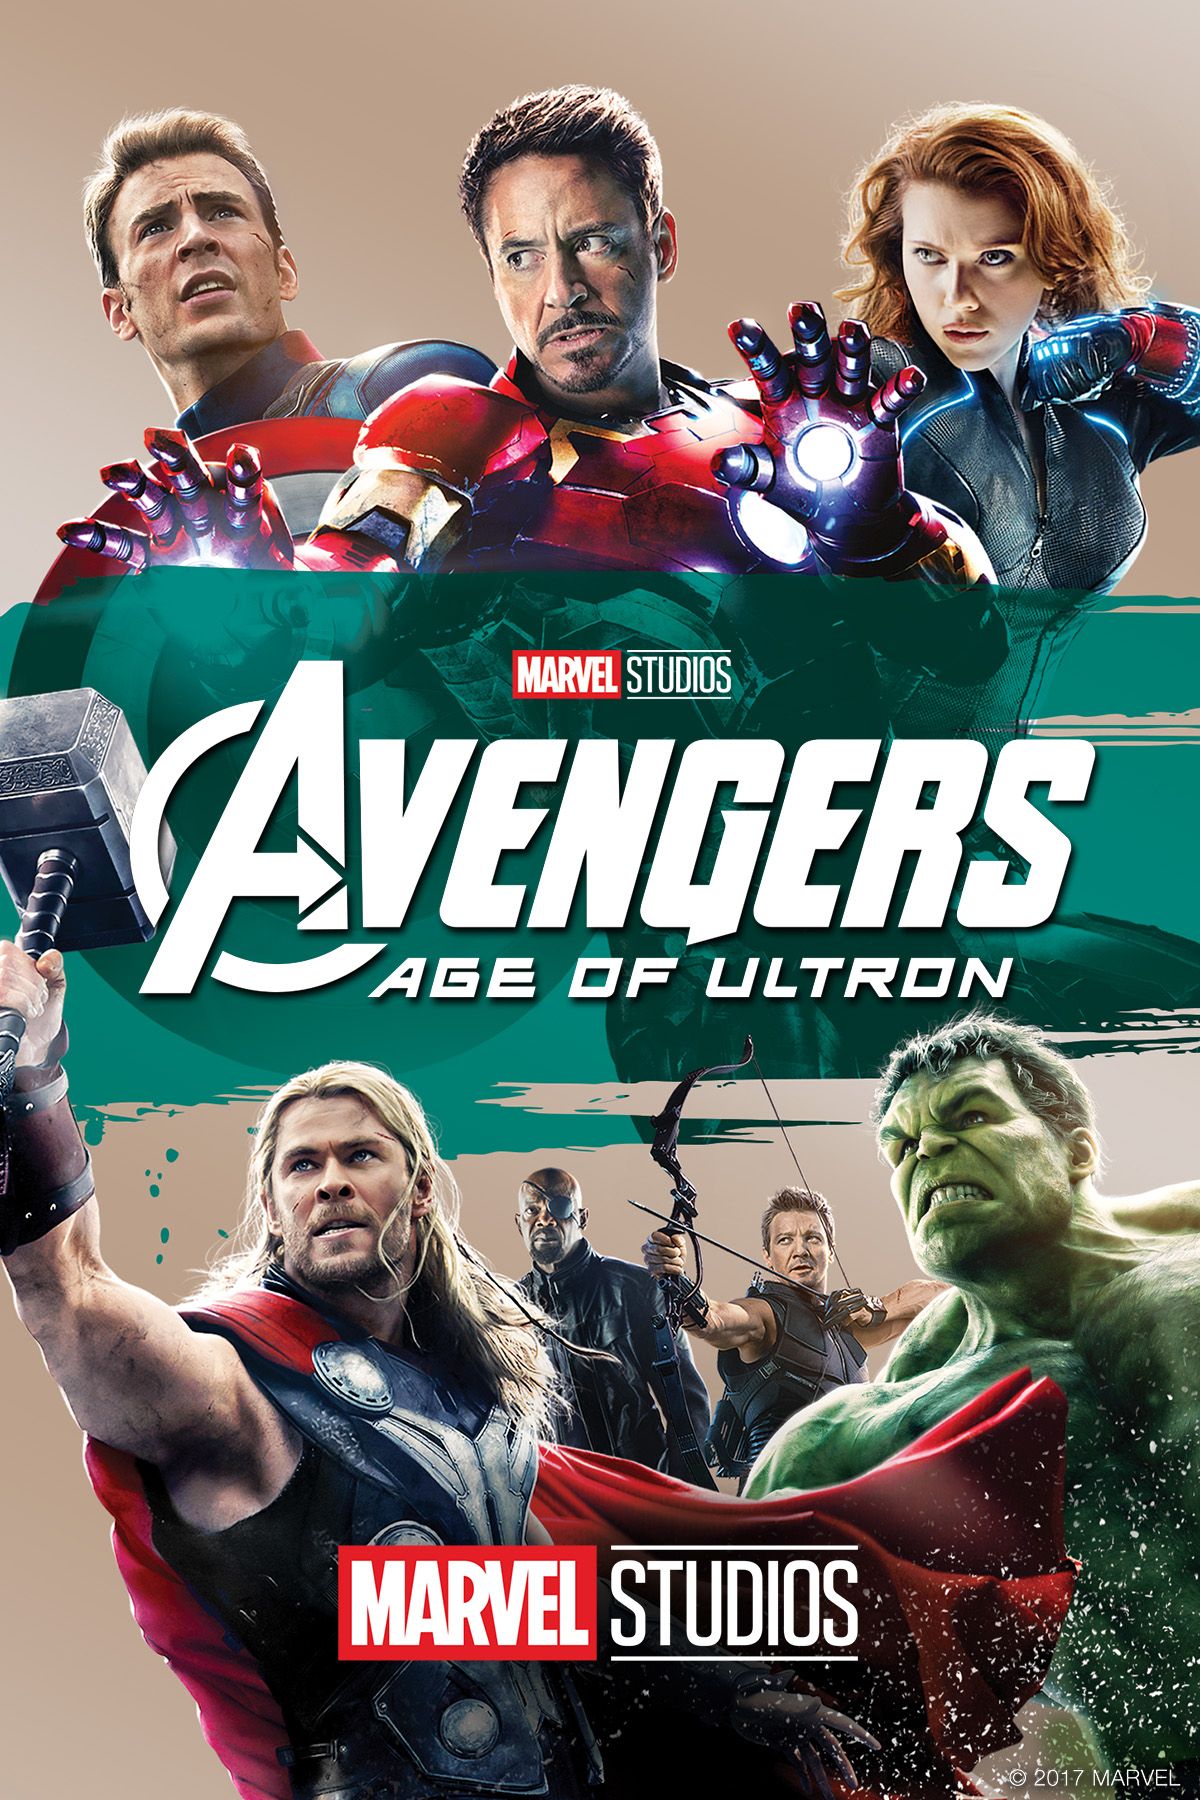 amal arshad recommends avengers 2 full movie online pic